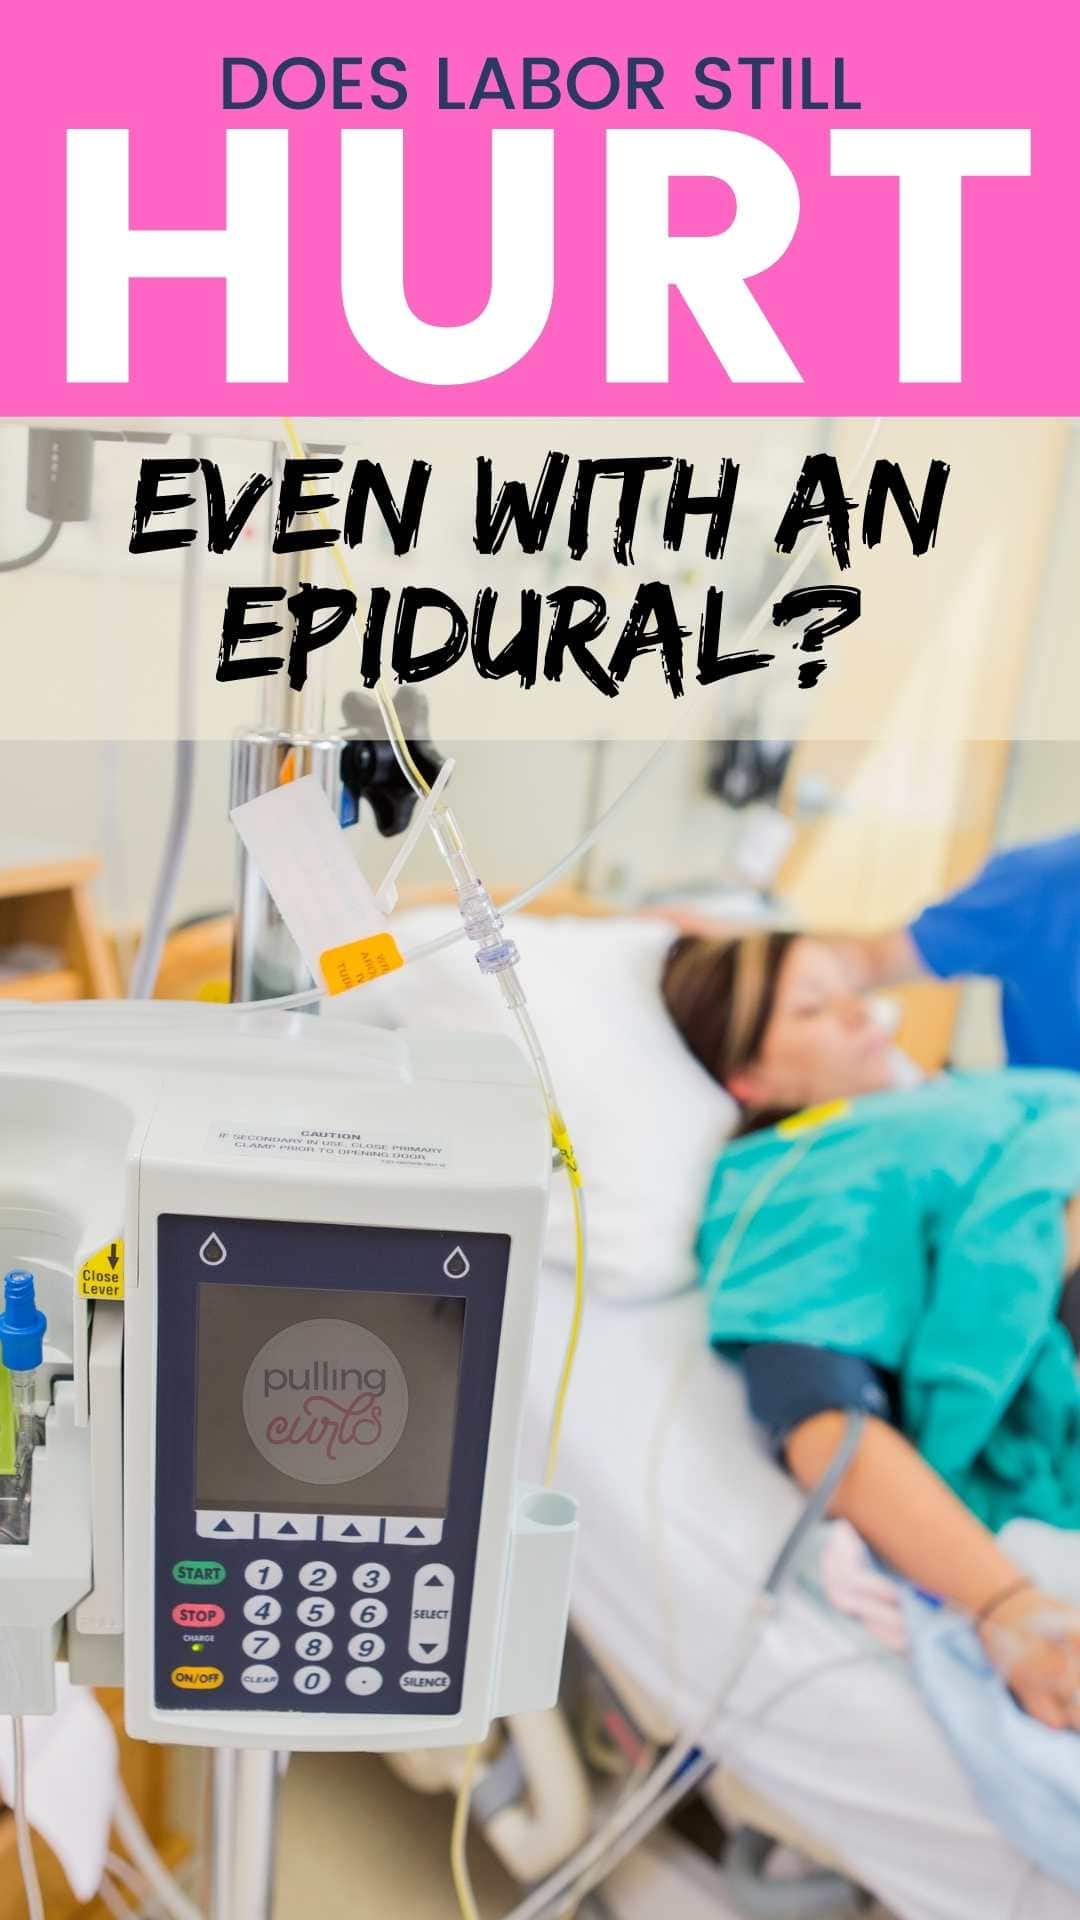 Having an epidural for labor pain relief does not mean that anesthesia takes away all the pain. It's mean for pain management from contractions as well as pushing and baby coming out. via @pullingcurls